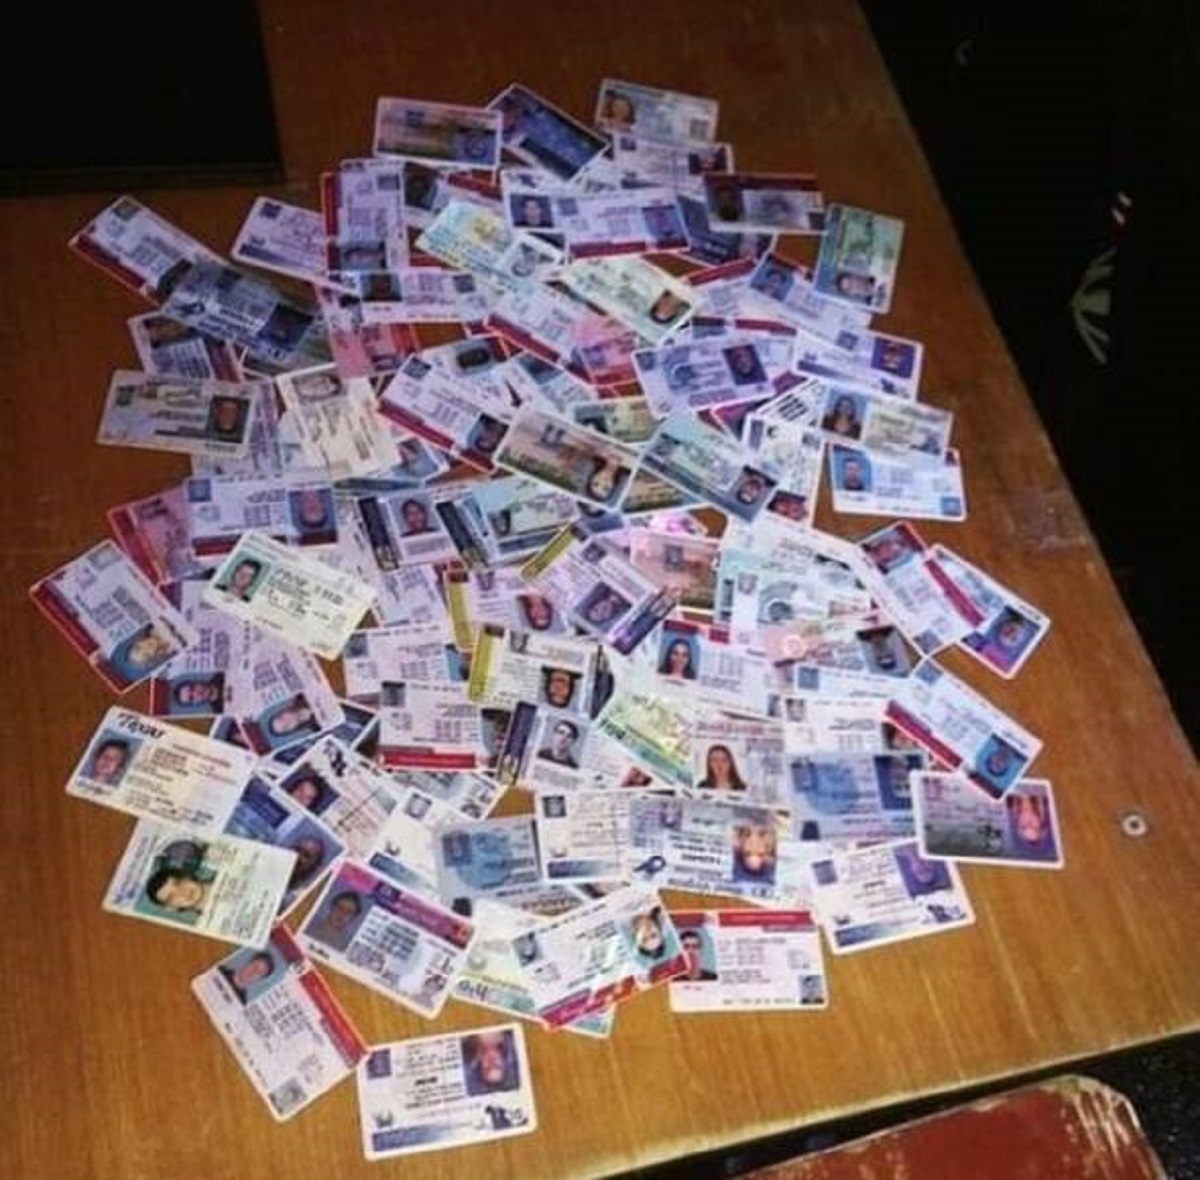 "All of the fake IDs collected at a music festival"